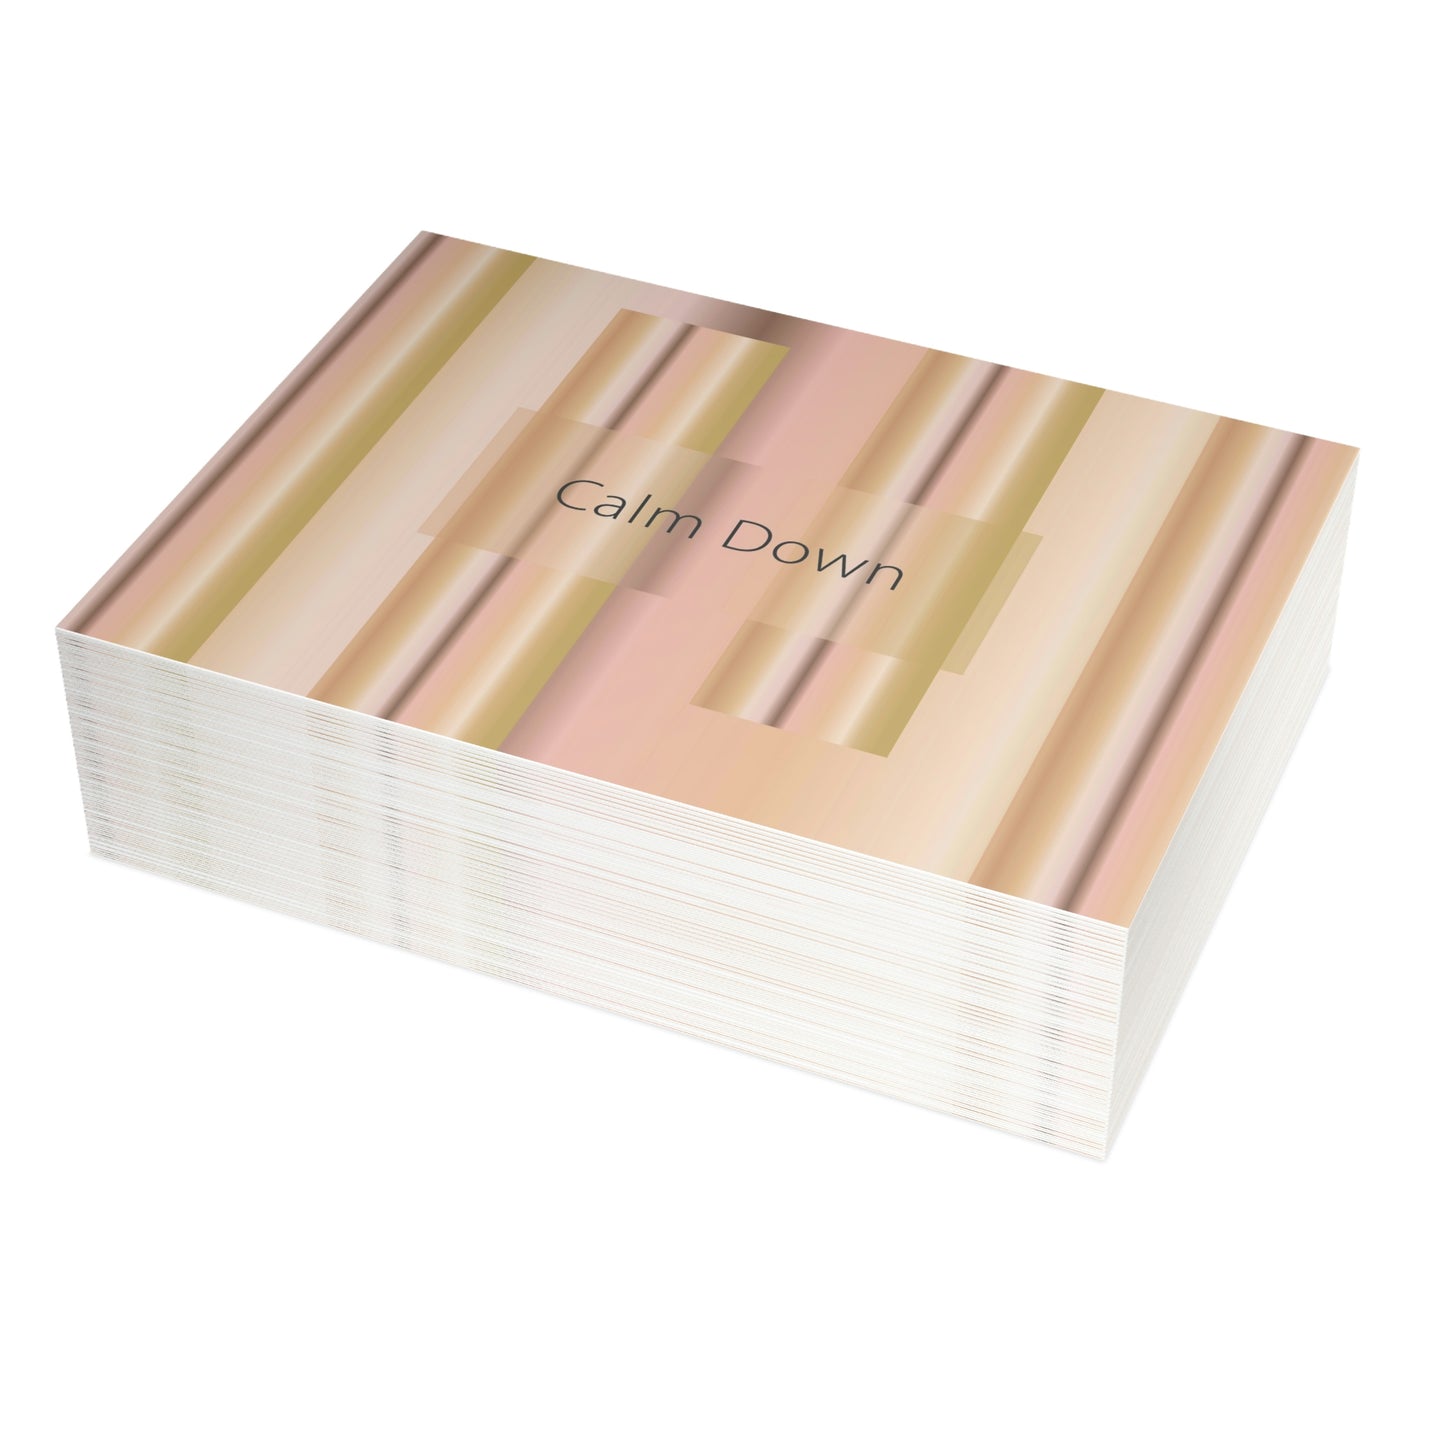 Unfolded Greeting Cards Horizontal (10, 30, and 50pcs) Calm Down - Design No.100